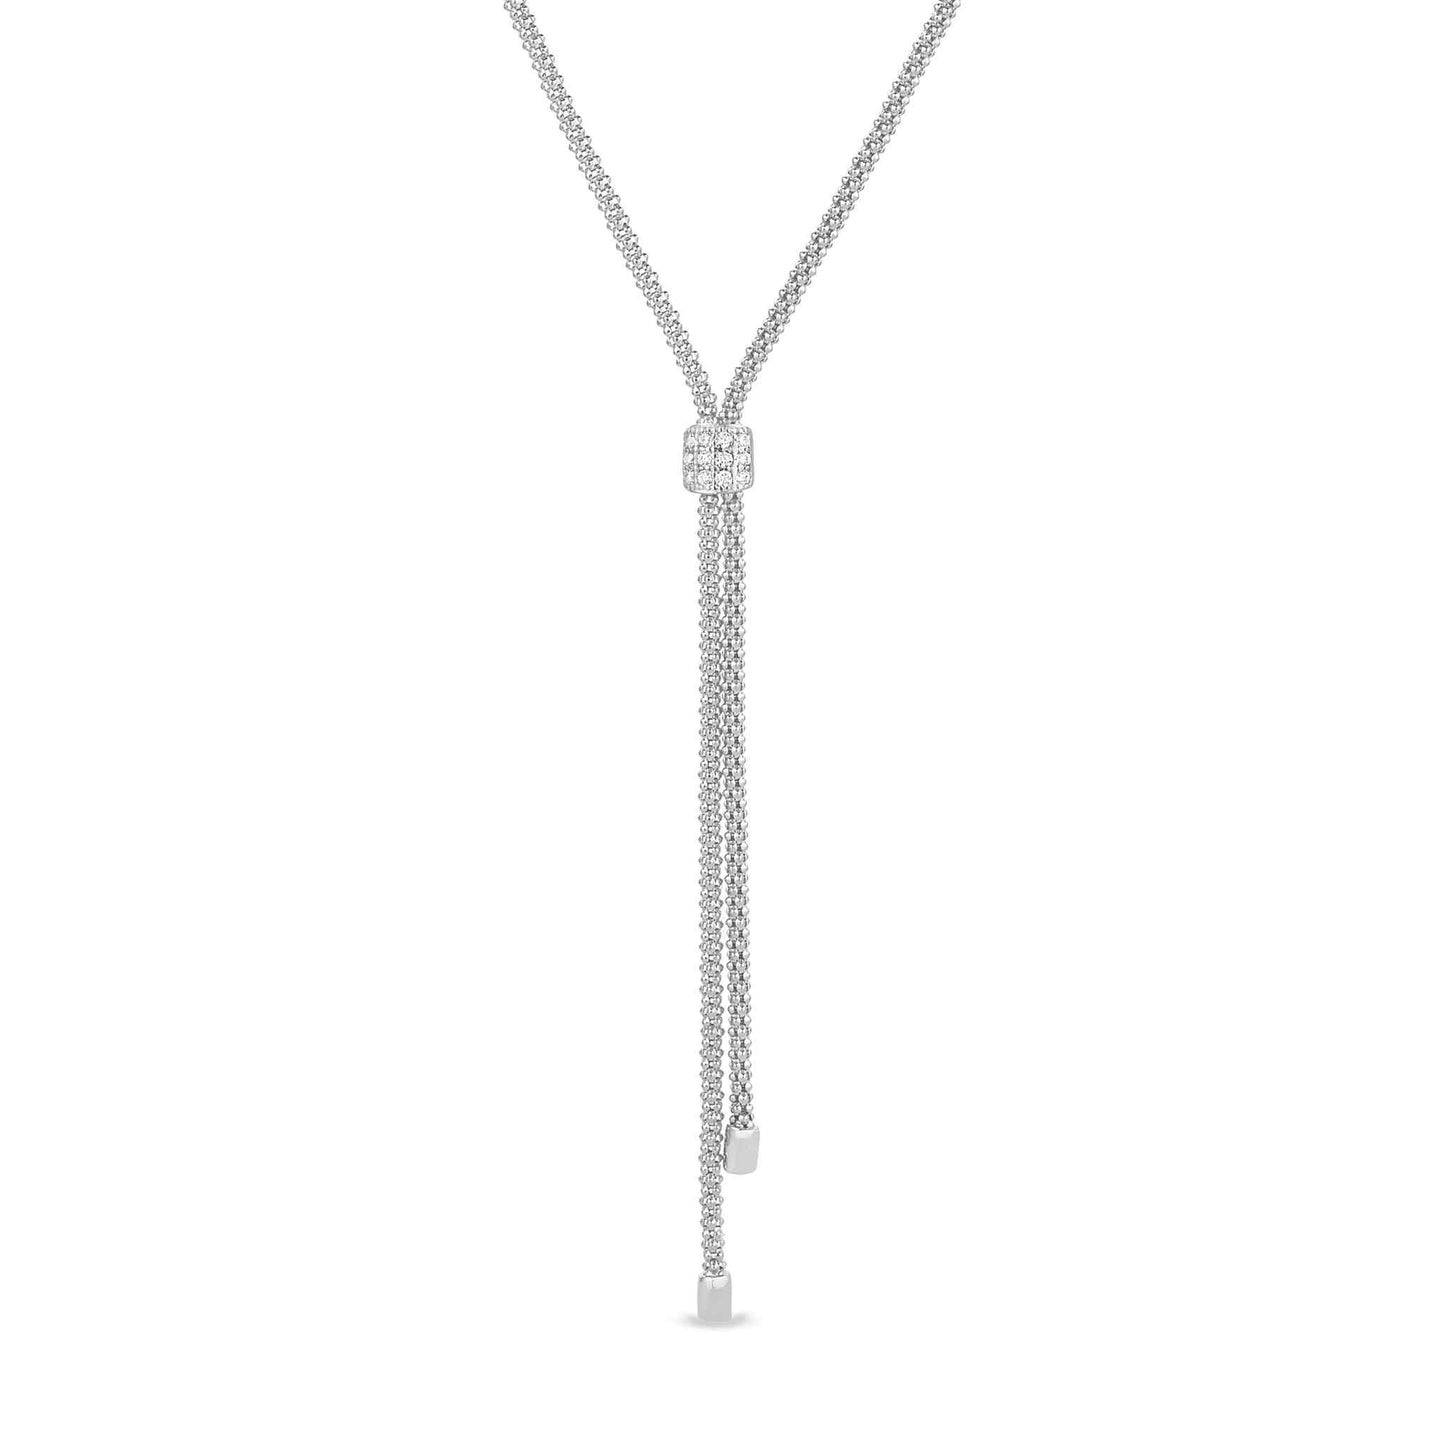 A lariat necklace with simulated diamond square accent displayed on a neutral white background.